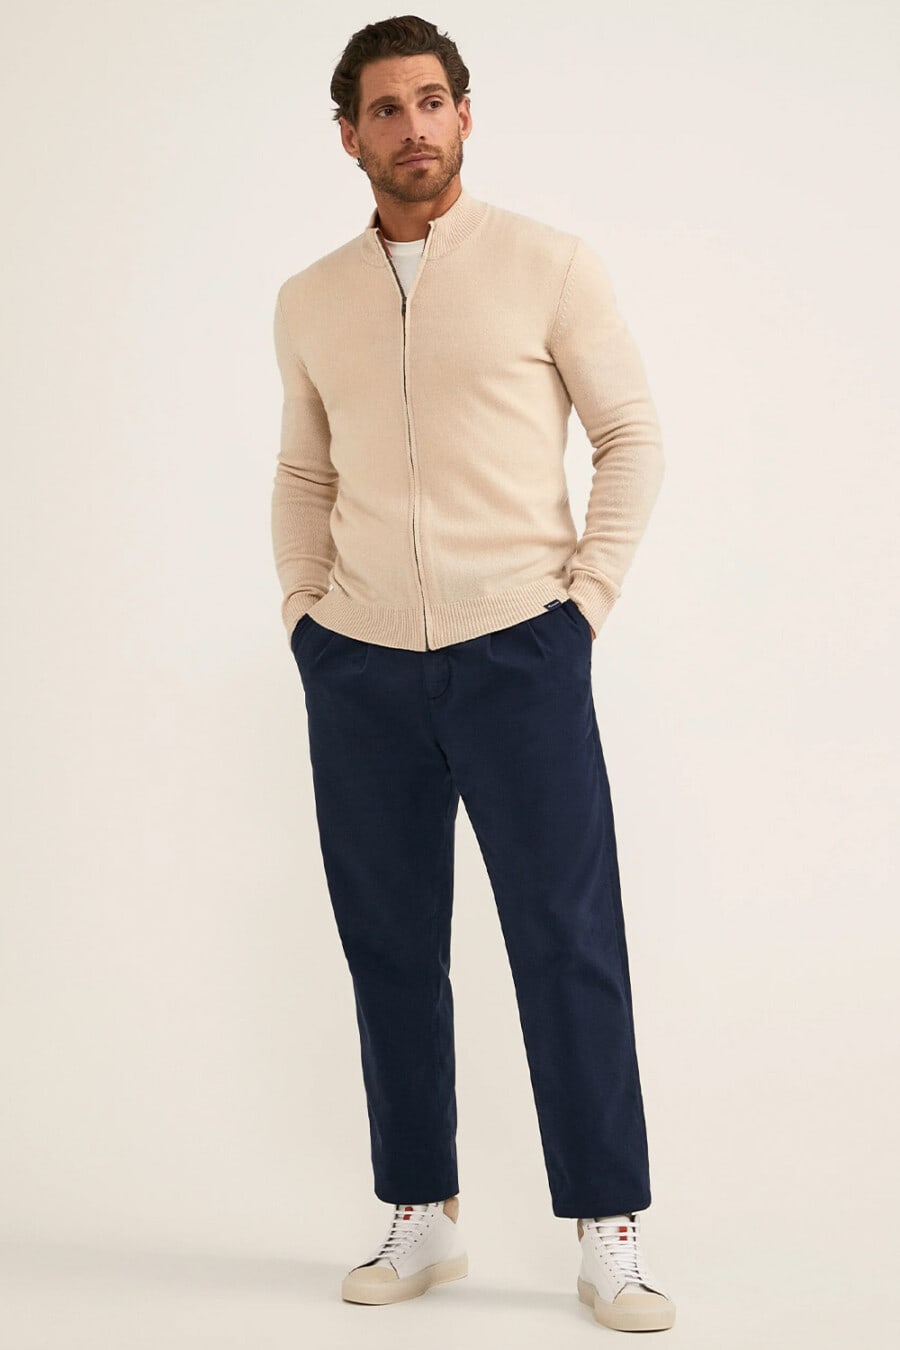 Men's navy cropped pants, white T-shirt, beige zip-up cardigan and white high-top sneakers outfit